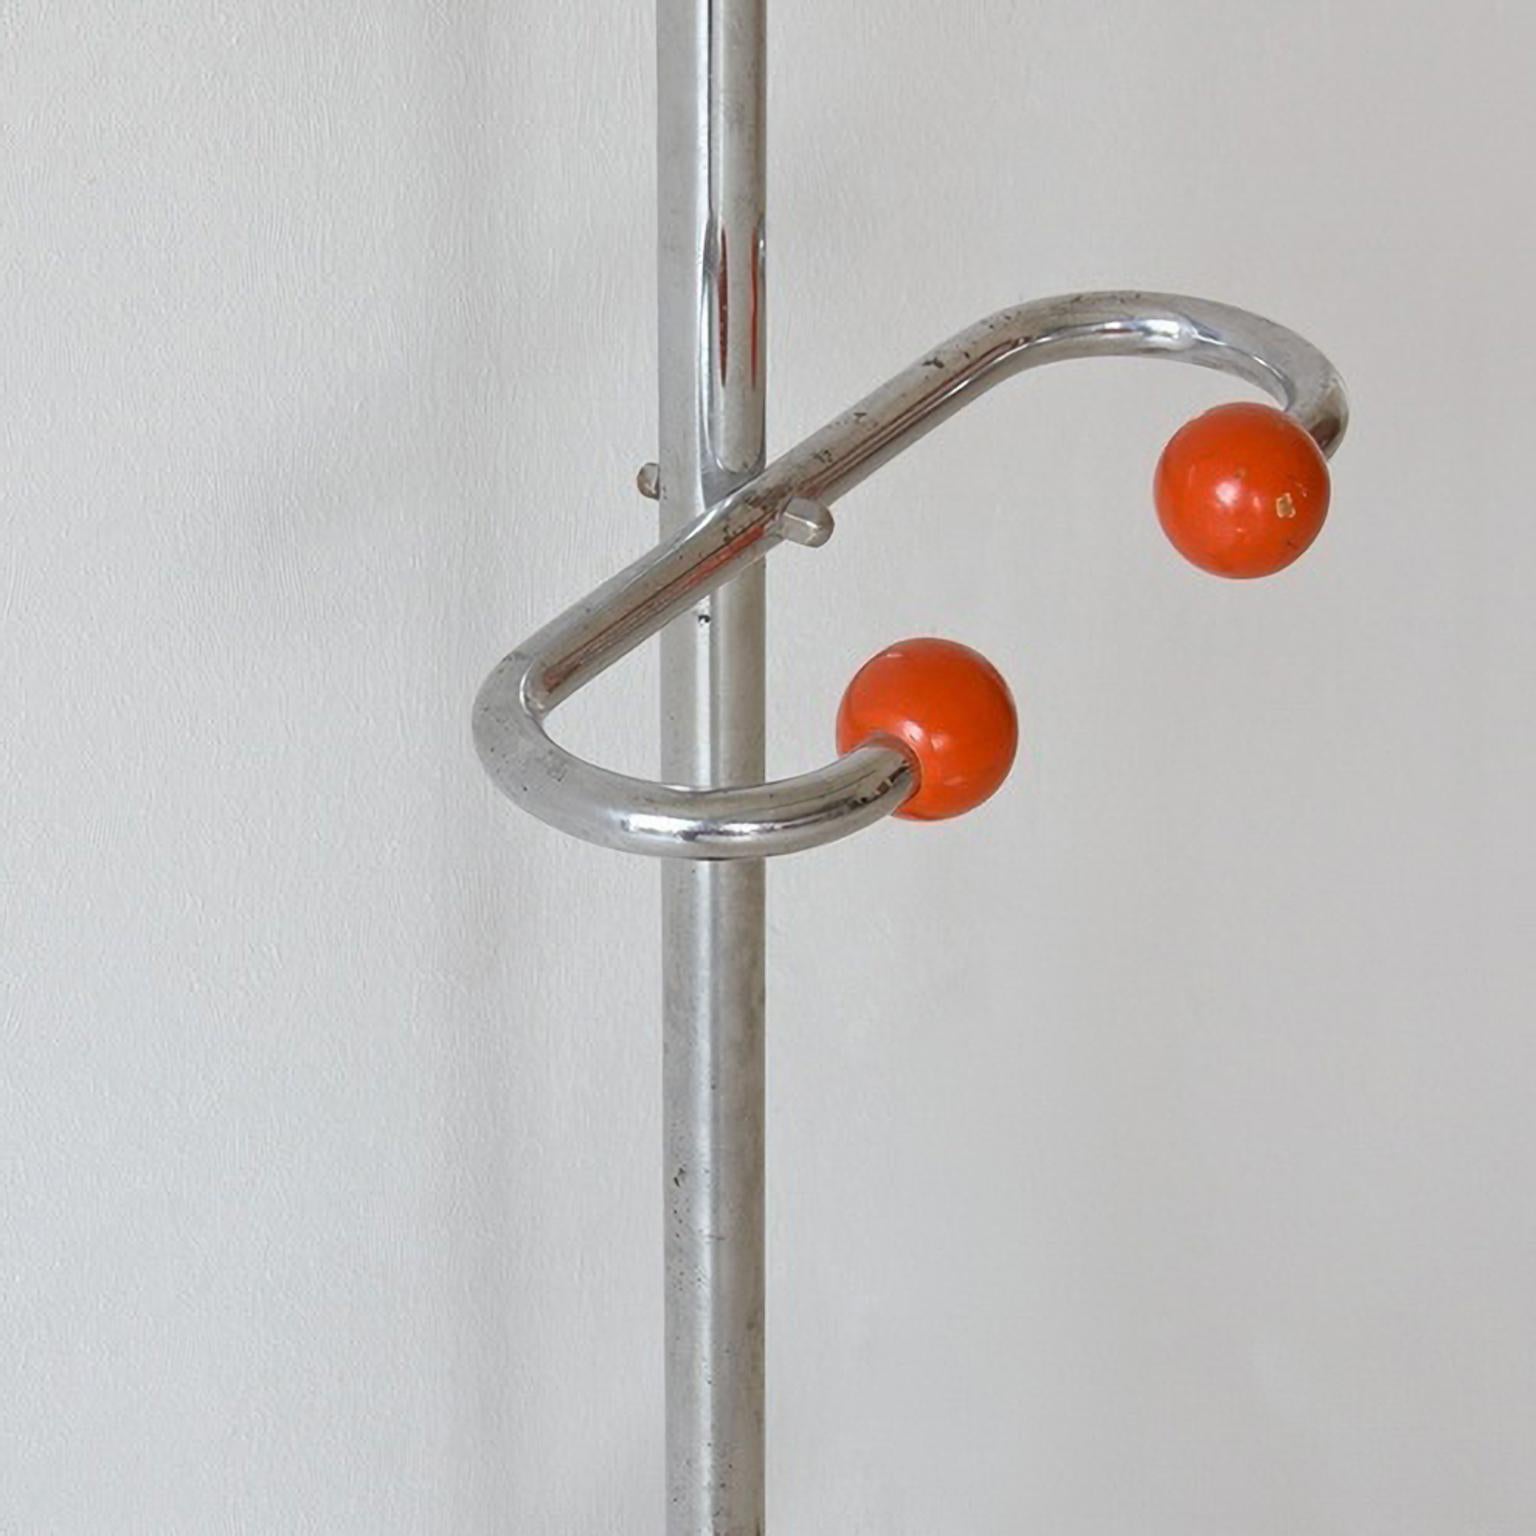 Mid-20th Century Modernist Coat, Hat and Umbrella Stand, Chromed Tubular Steel, Painted Wood, 30s For Sale